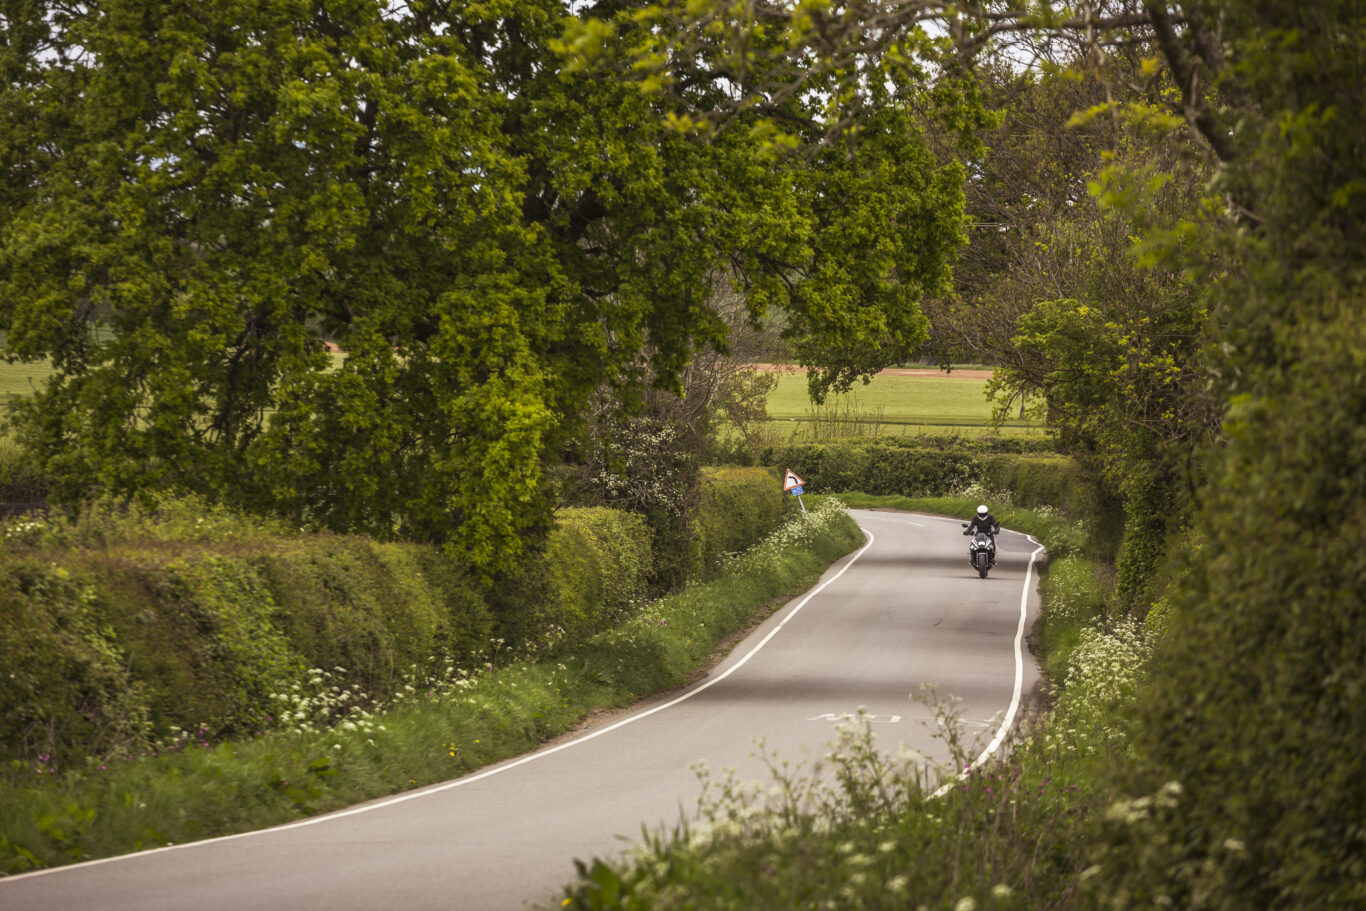 The Katana feels at home on the UK's country roads